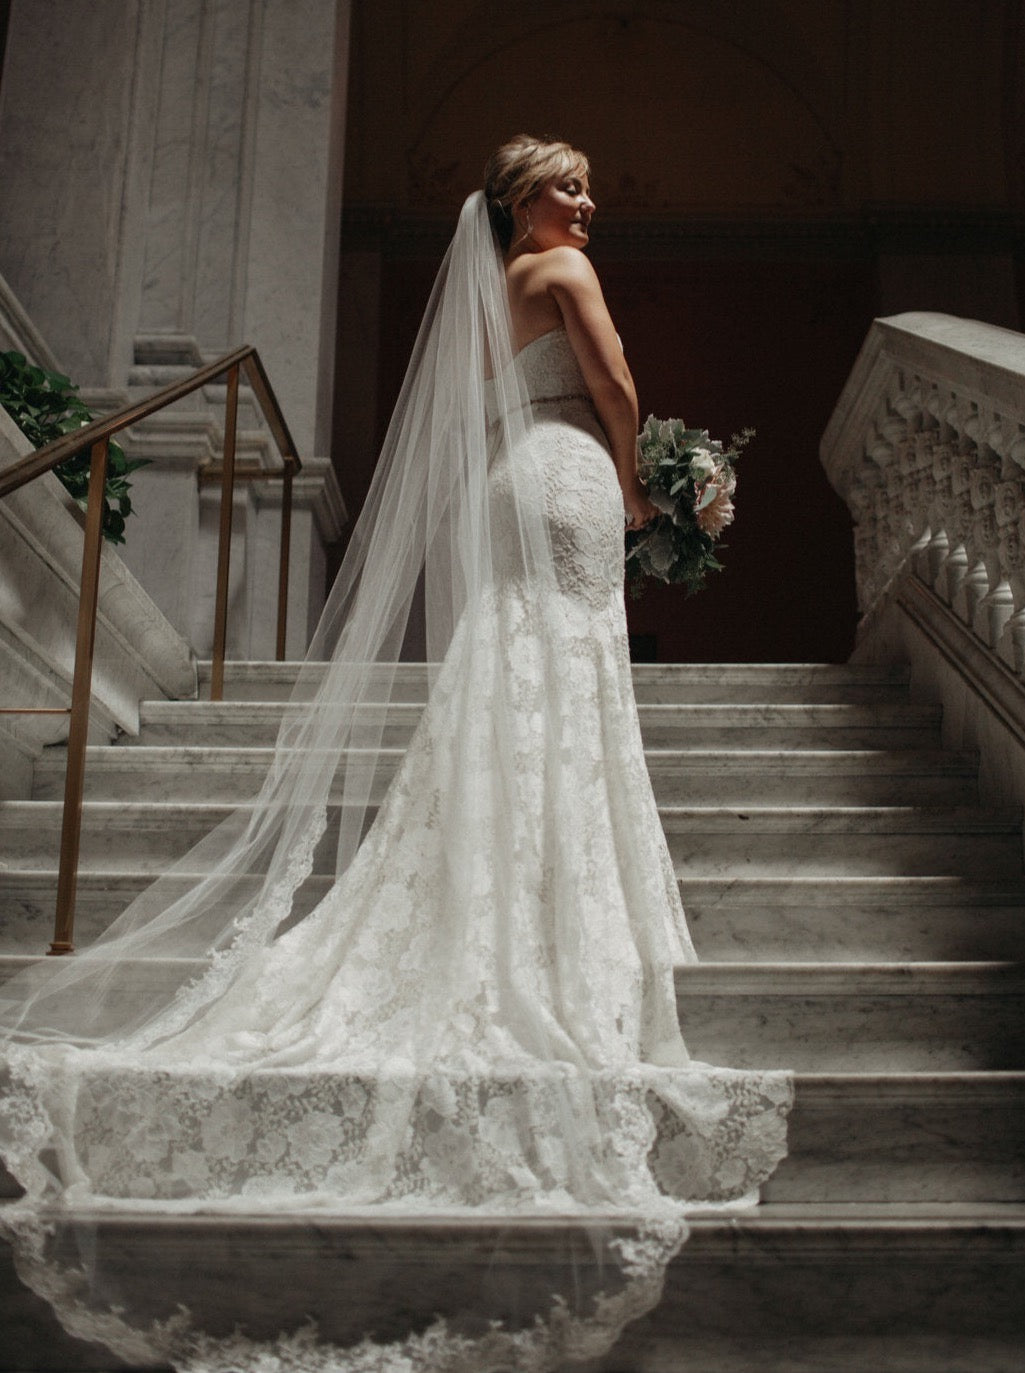 lace edged wedding veil cathedral length on staircase